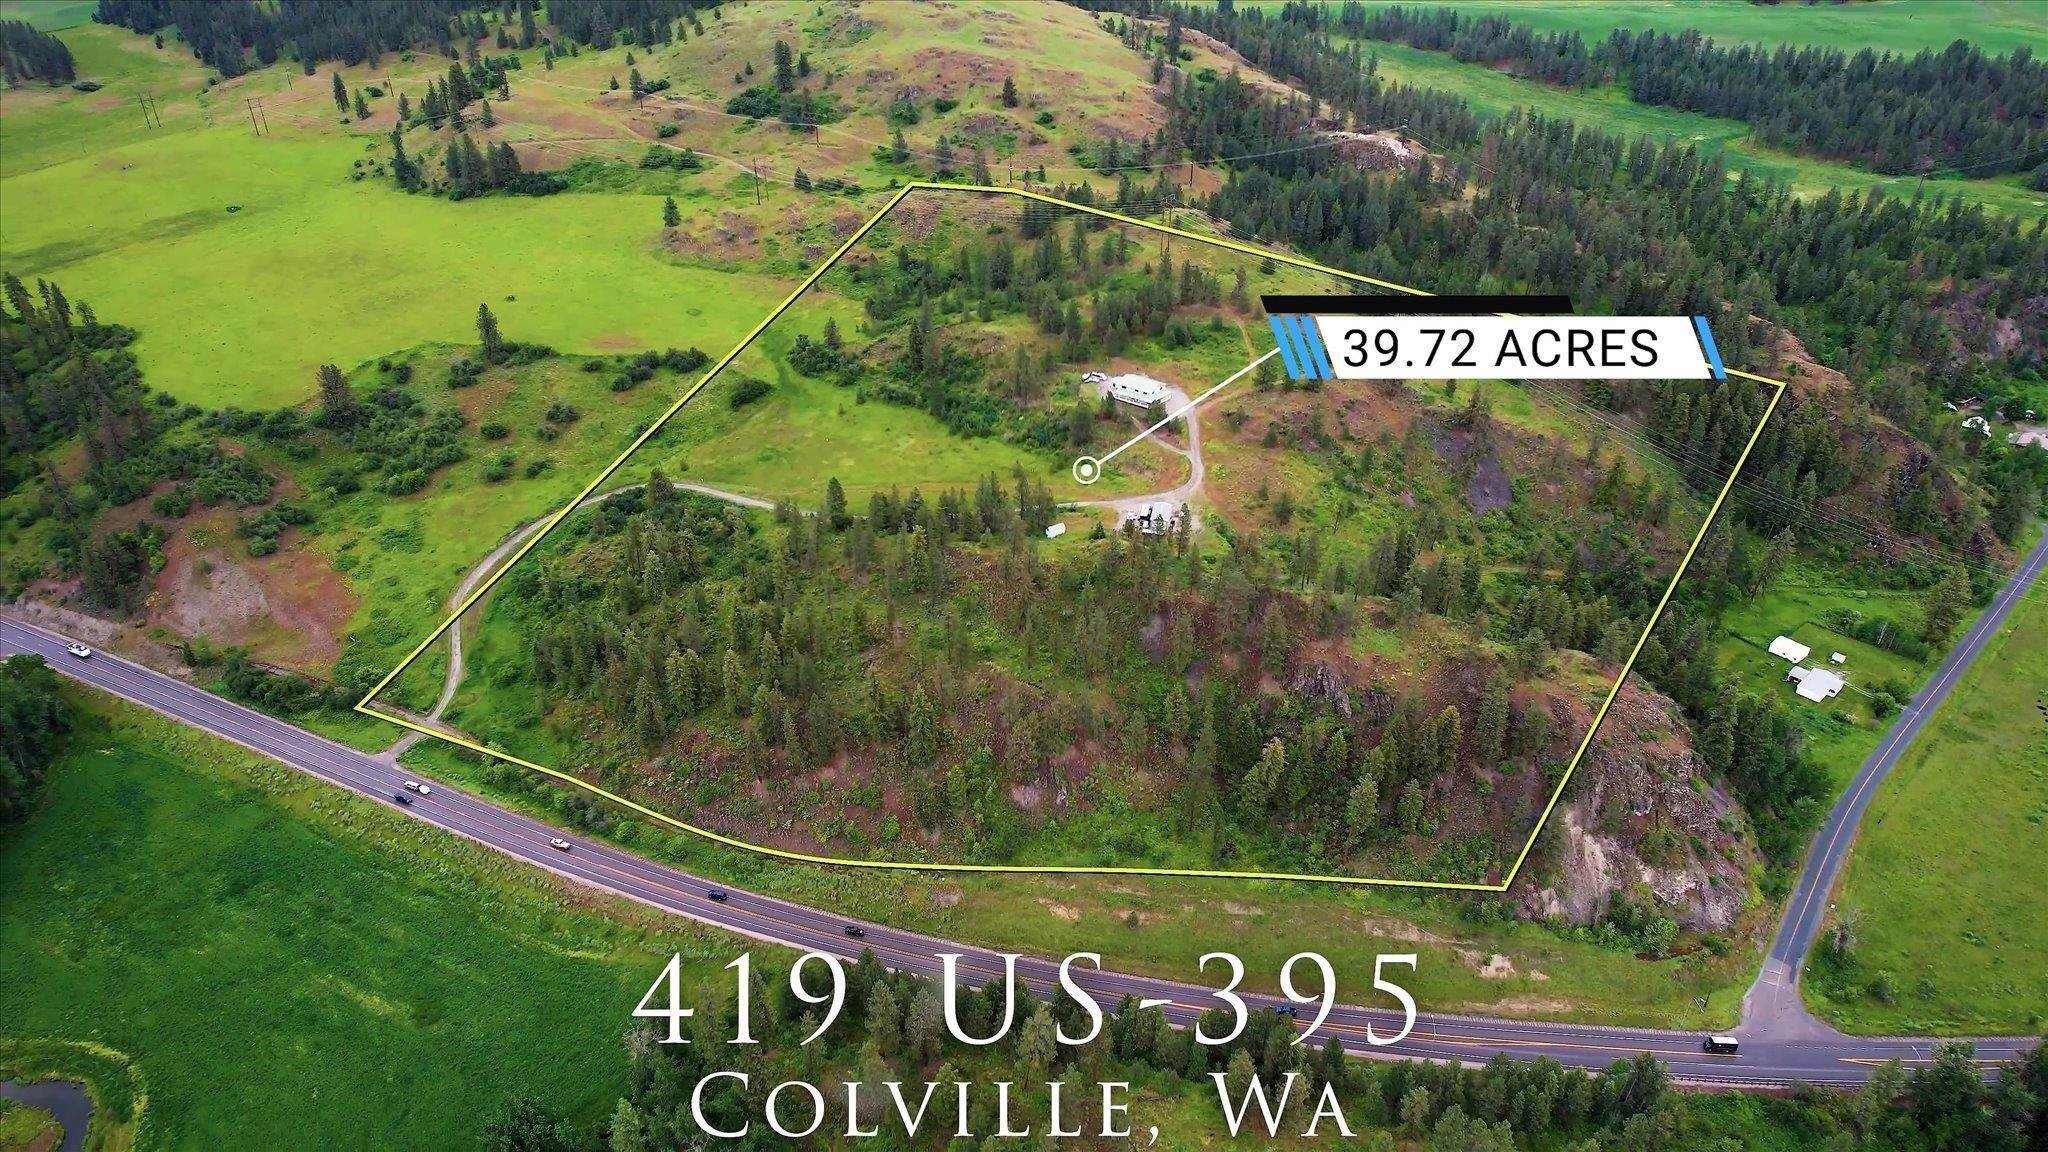 2. Single Family Homes for Sale at 419 S Highway 395 S Colville, Washington 99114 United States